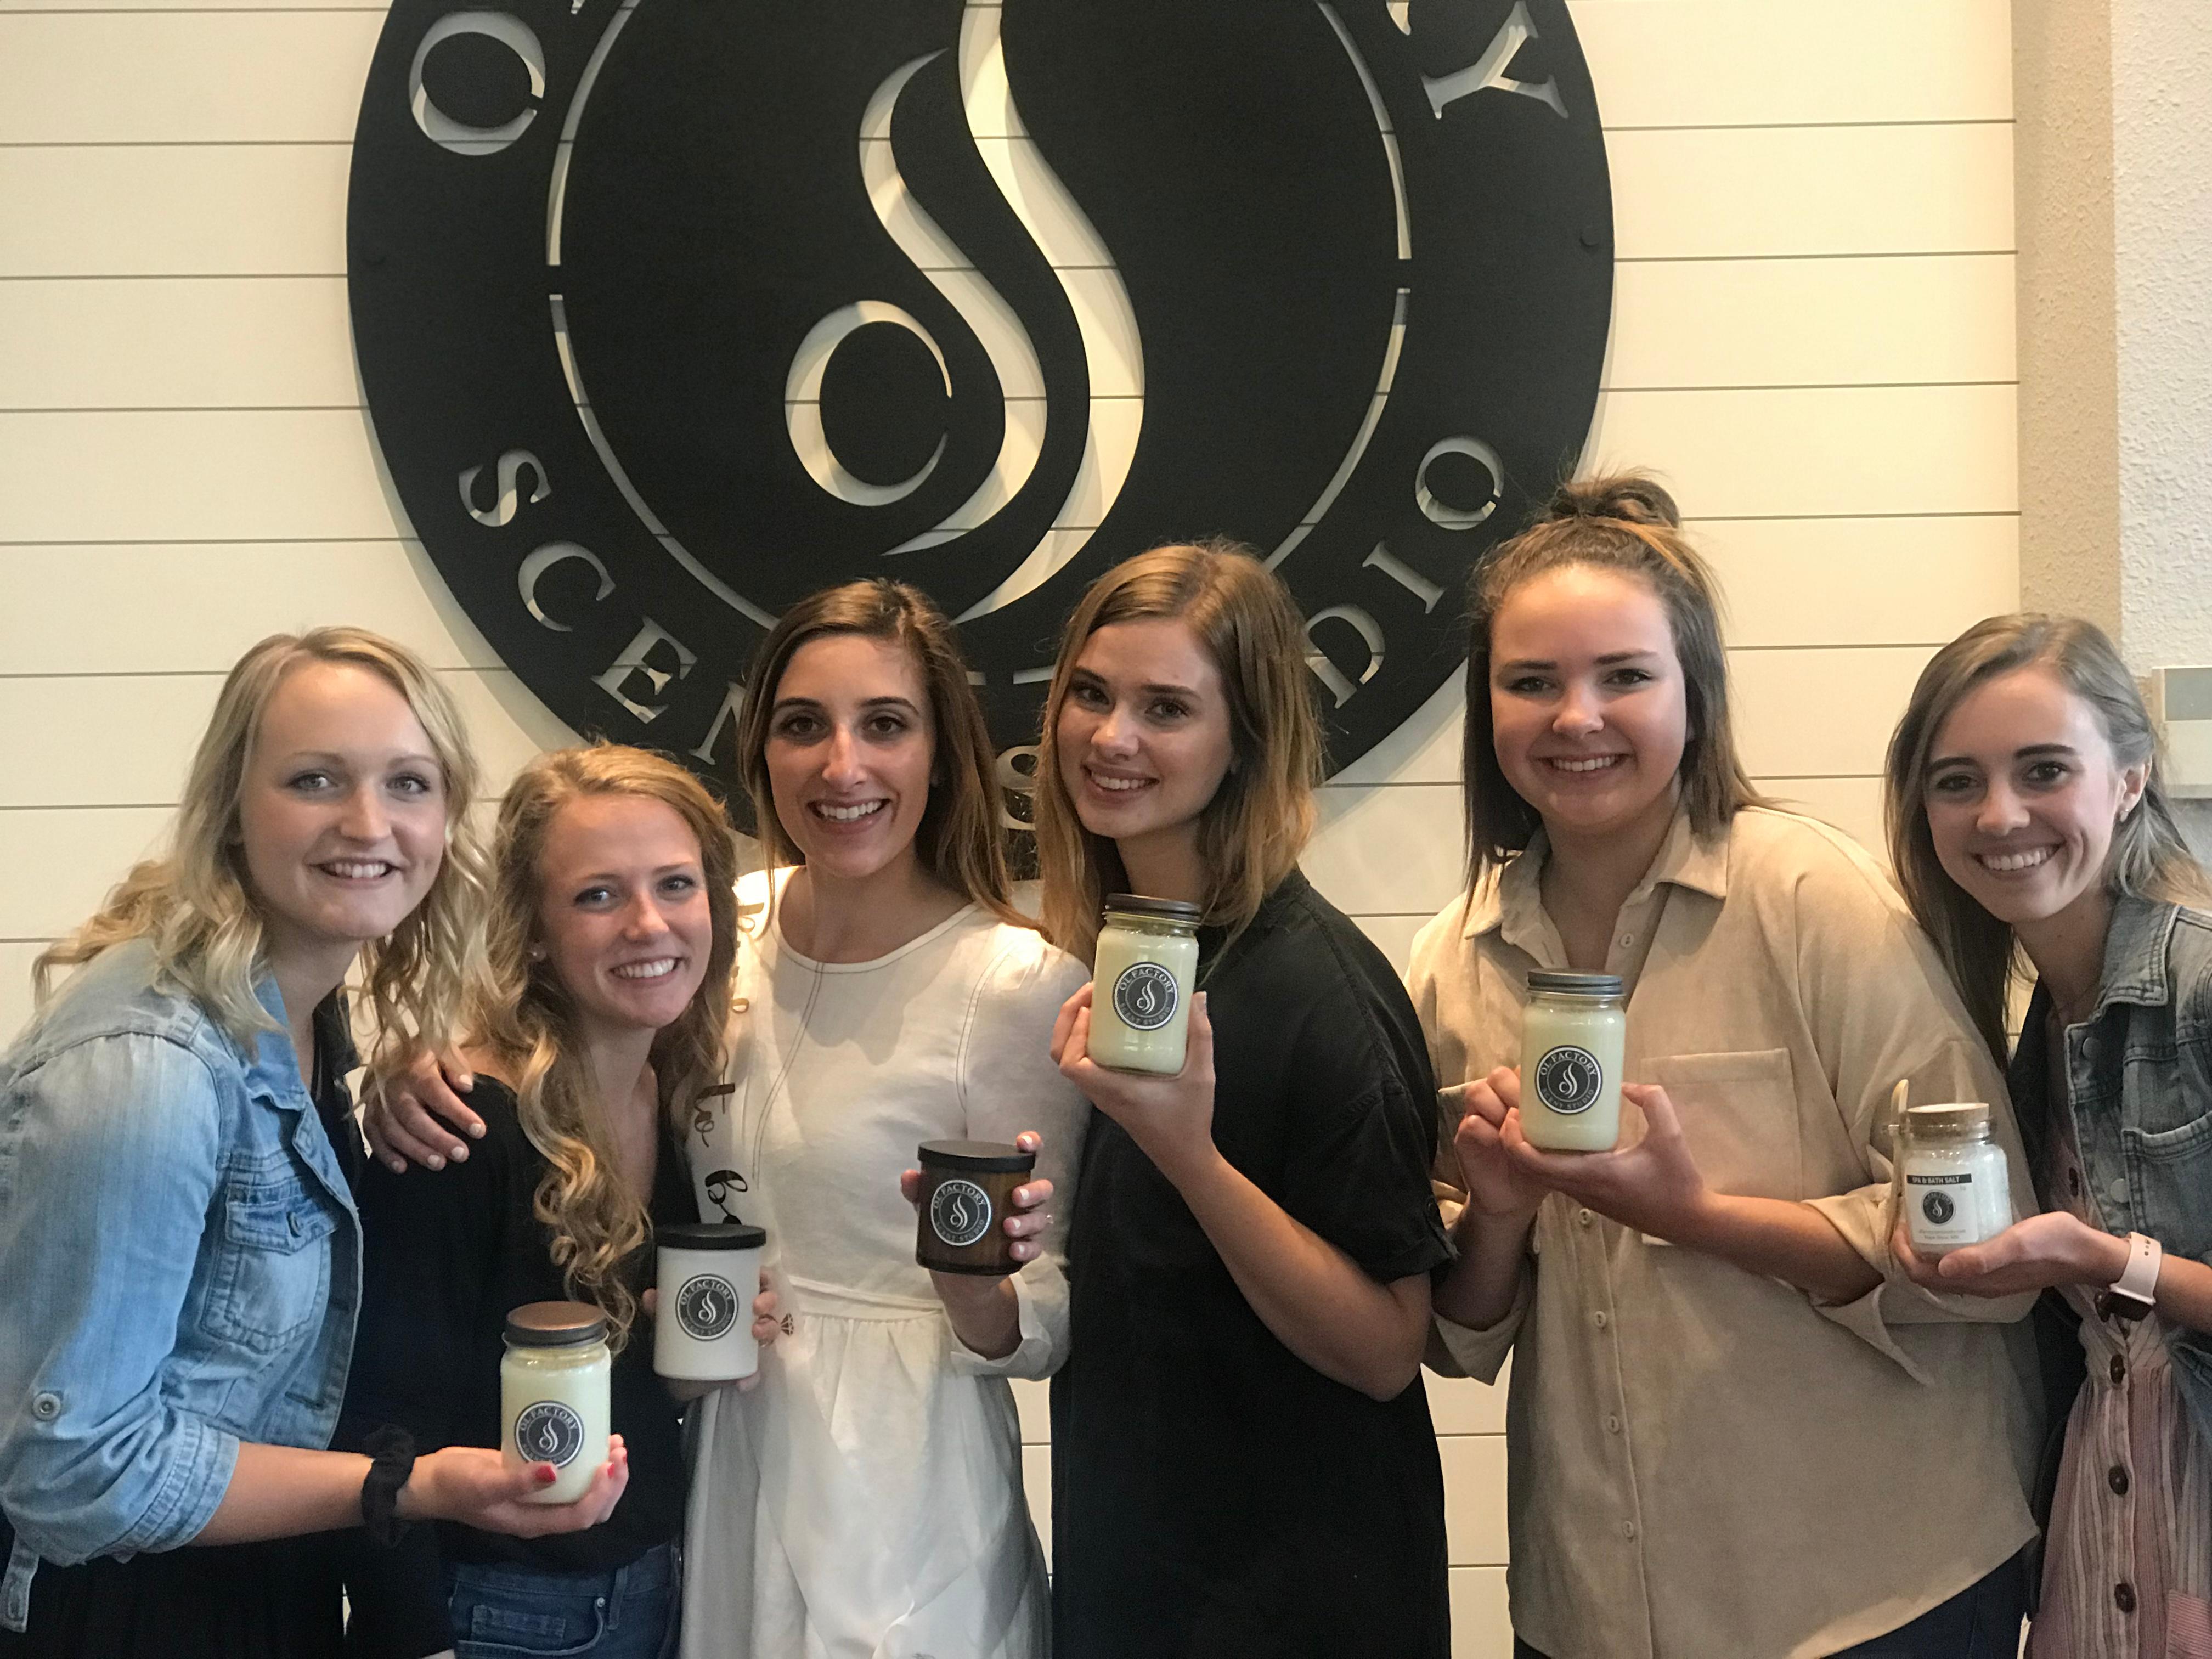 Olfactory Scent Studio provides a fun do-it-yourself creative experience for you to enjoy by yoursel Olfactory Scent Studio Maple Grove (763)350-6953